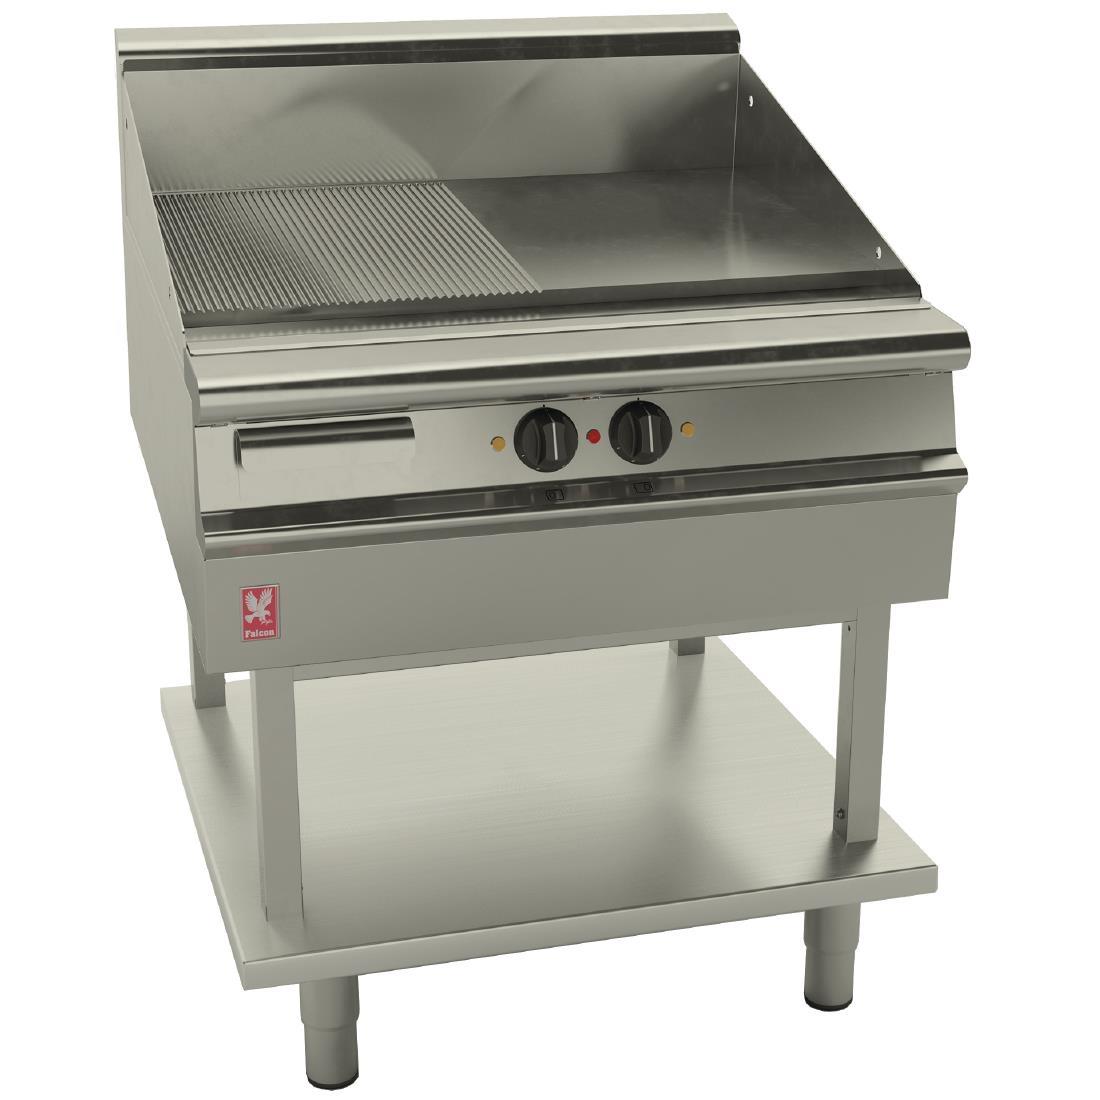 Falcon Dominator Plus 800mm Wide Half Ribbed Griddle on Fixed Stand E3481R - GP108  - 1